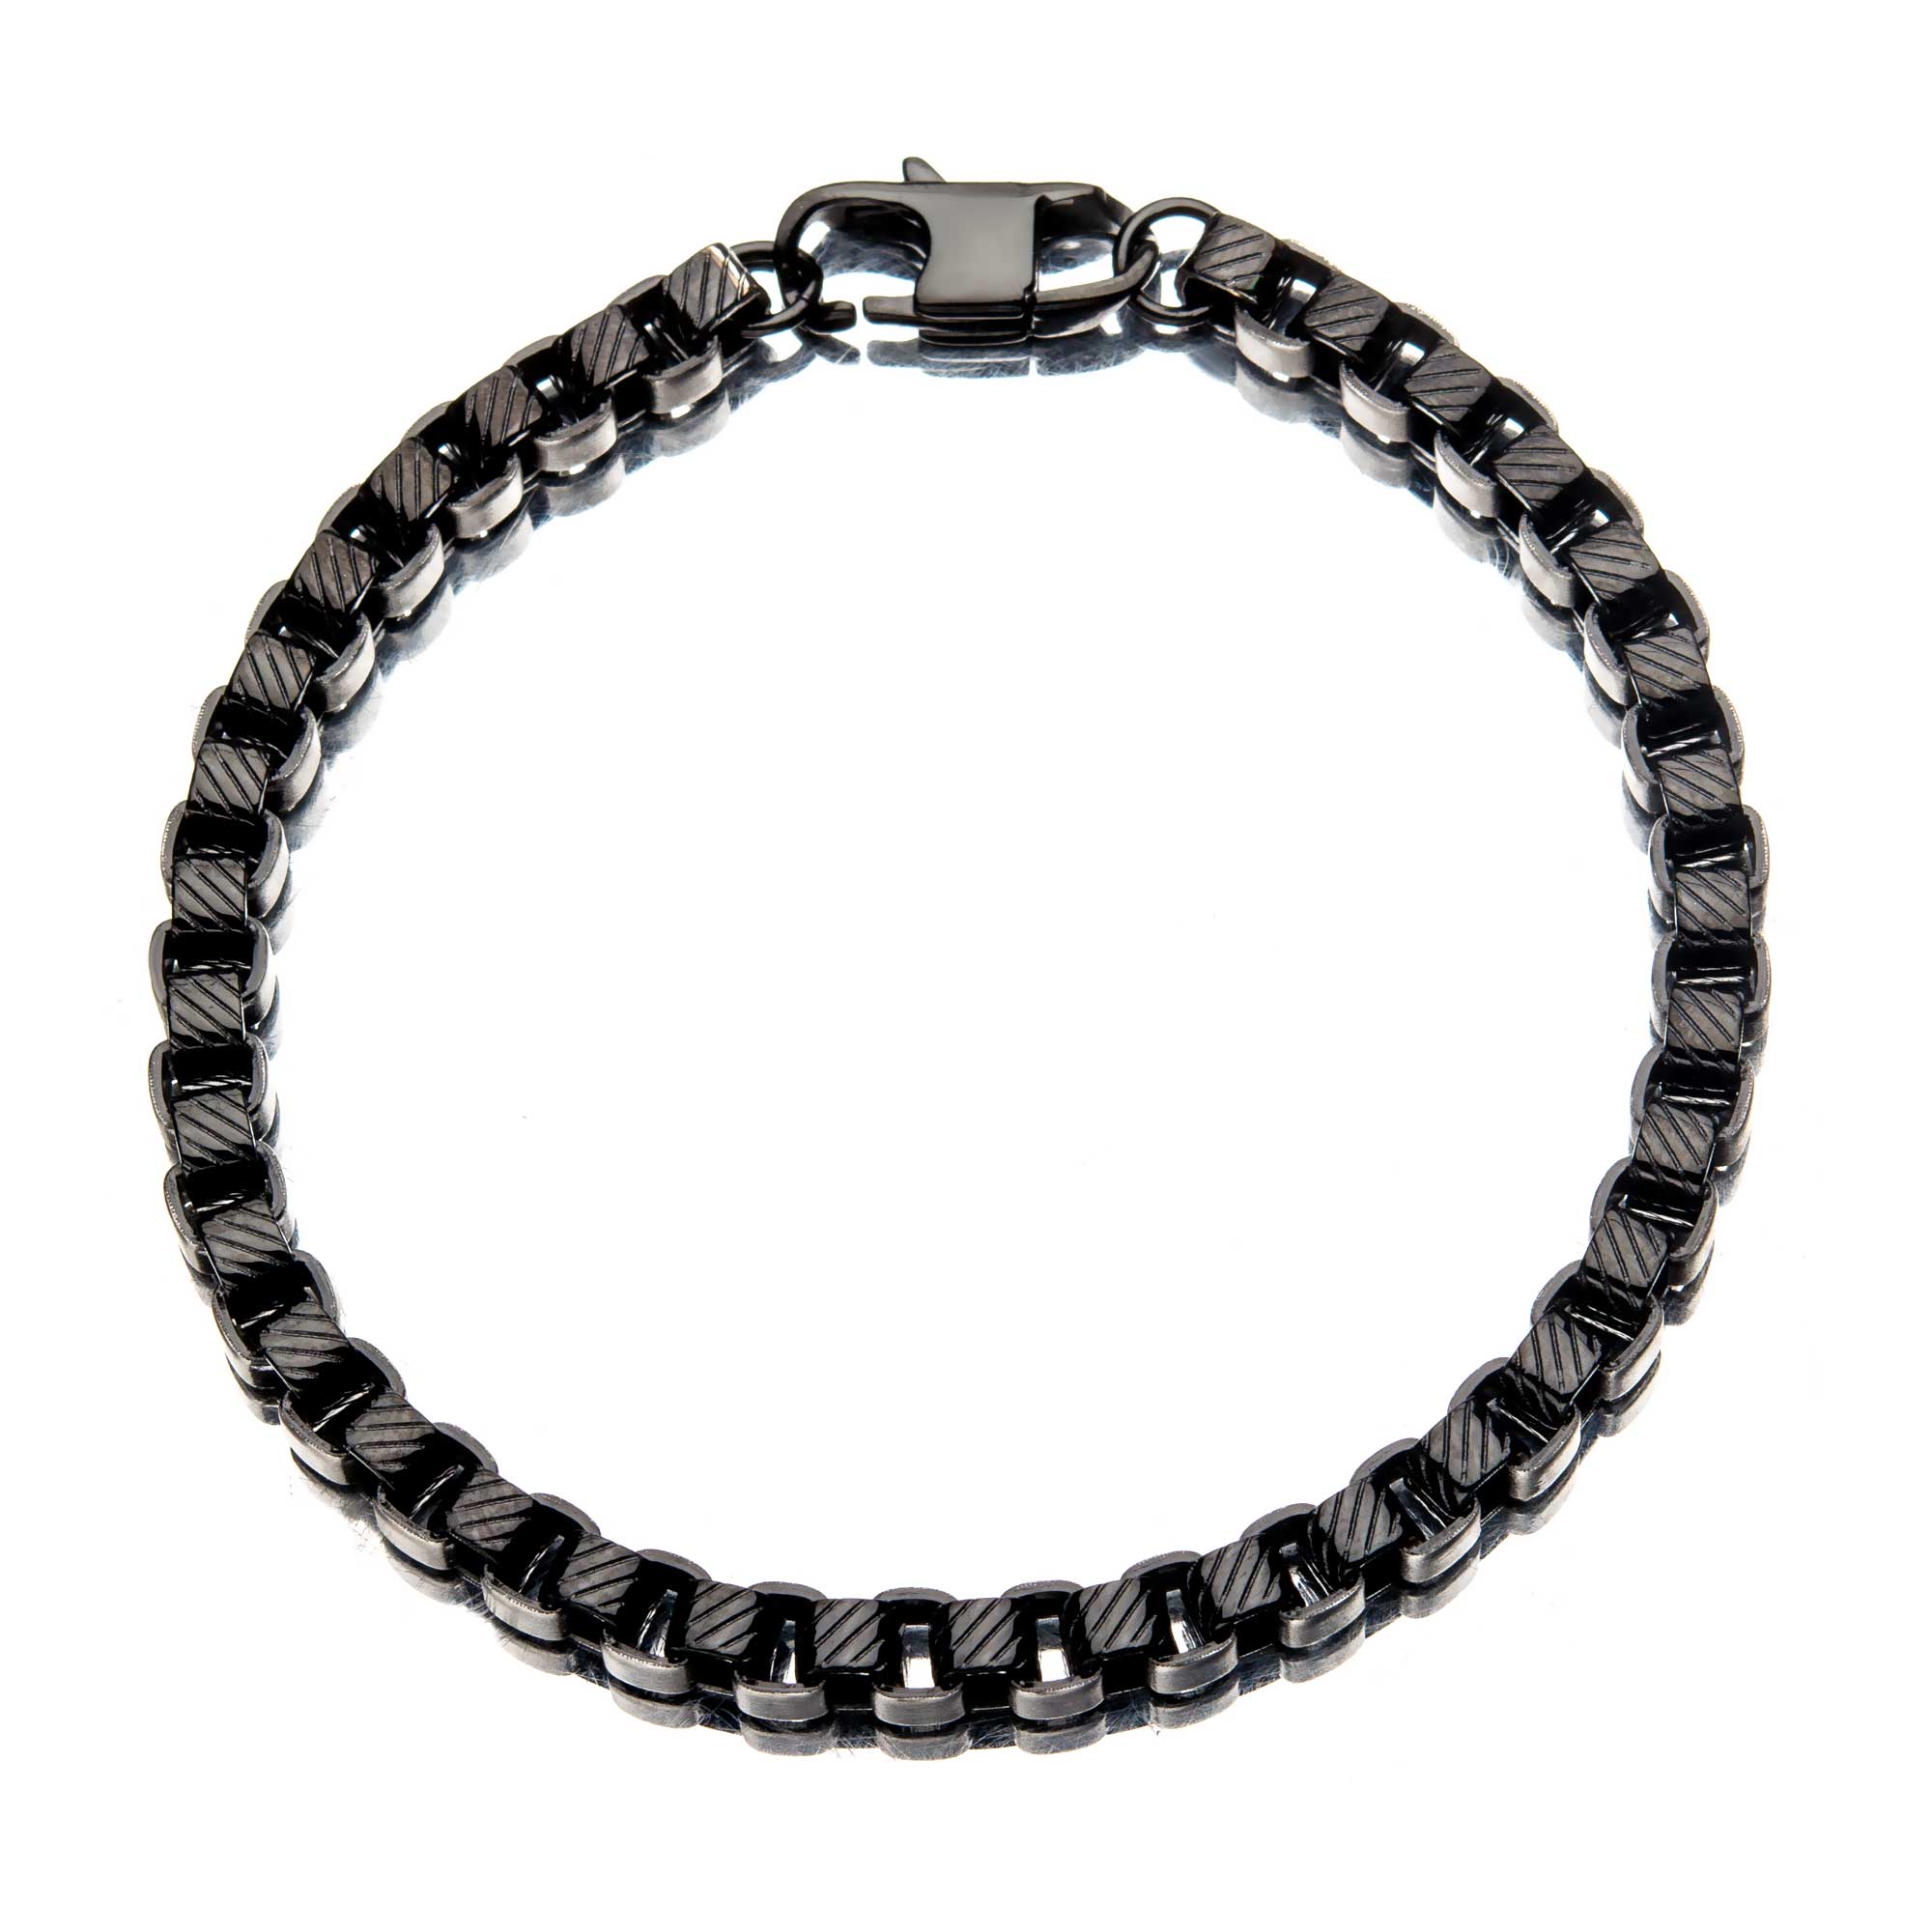 Stainless Steel Black Plated 5.5mm Round Box Chain with Lobster Clasp Image 2 Midtown Diamonds Reno, NV